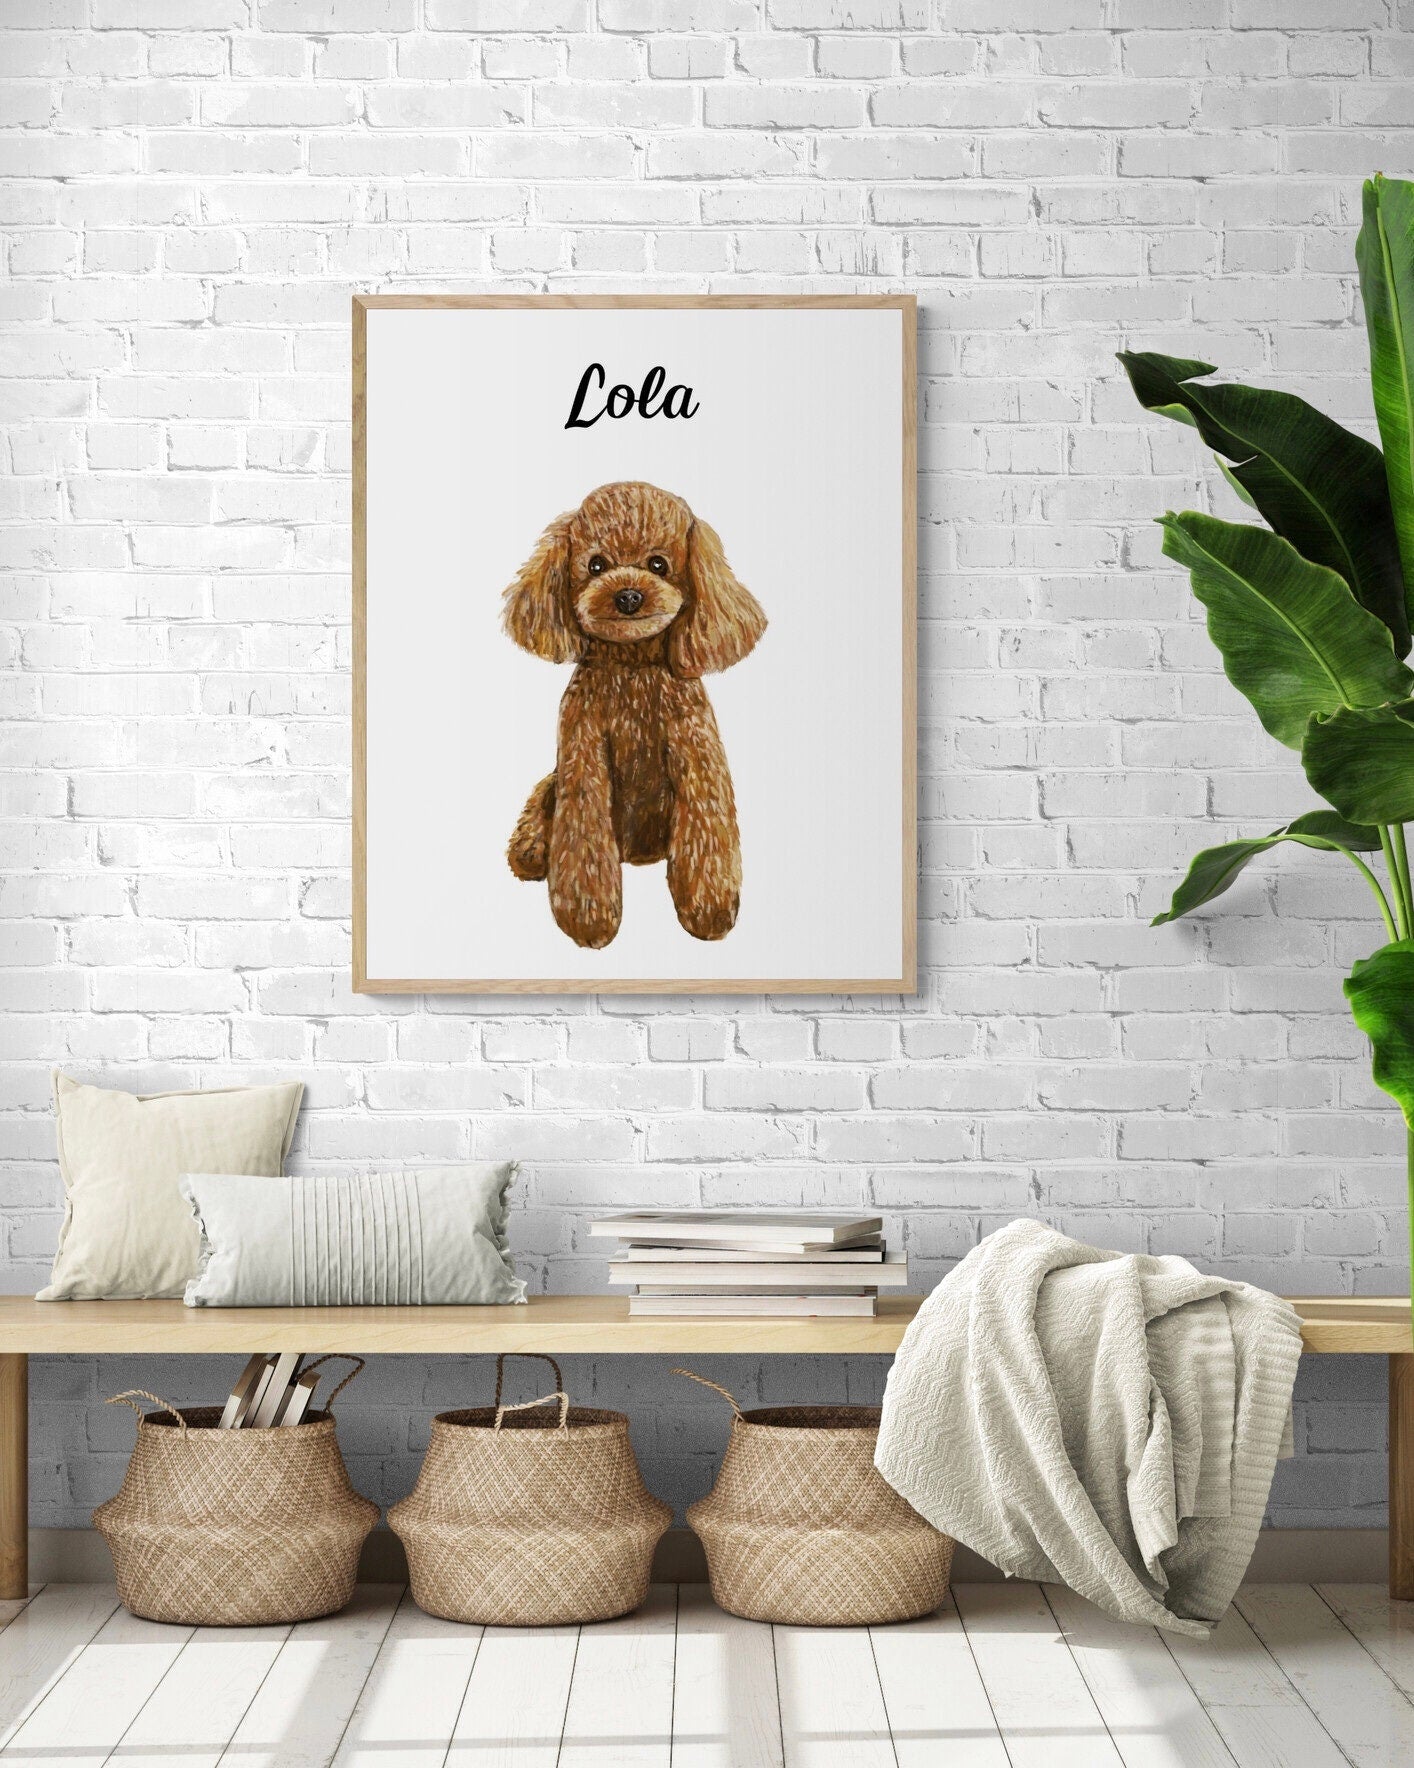 Personalized Brown Poodle Print, Poodle Painting, Doggy Artwork,Cute Poodle Print, Living Room Wall Art, Bedroom Art Print, Nursery Decor